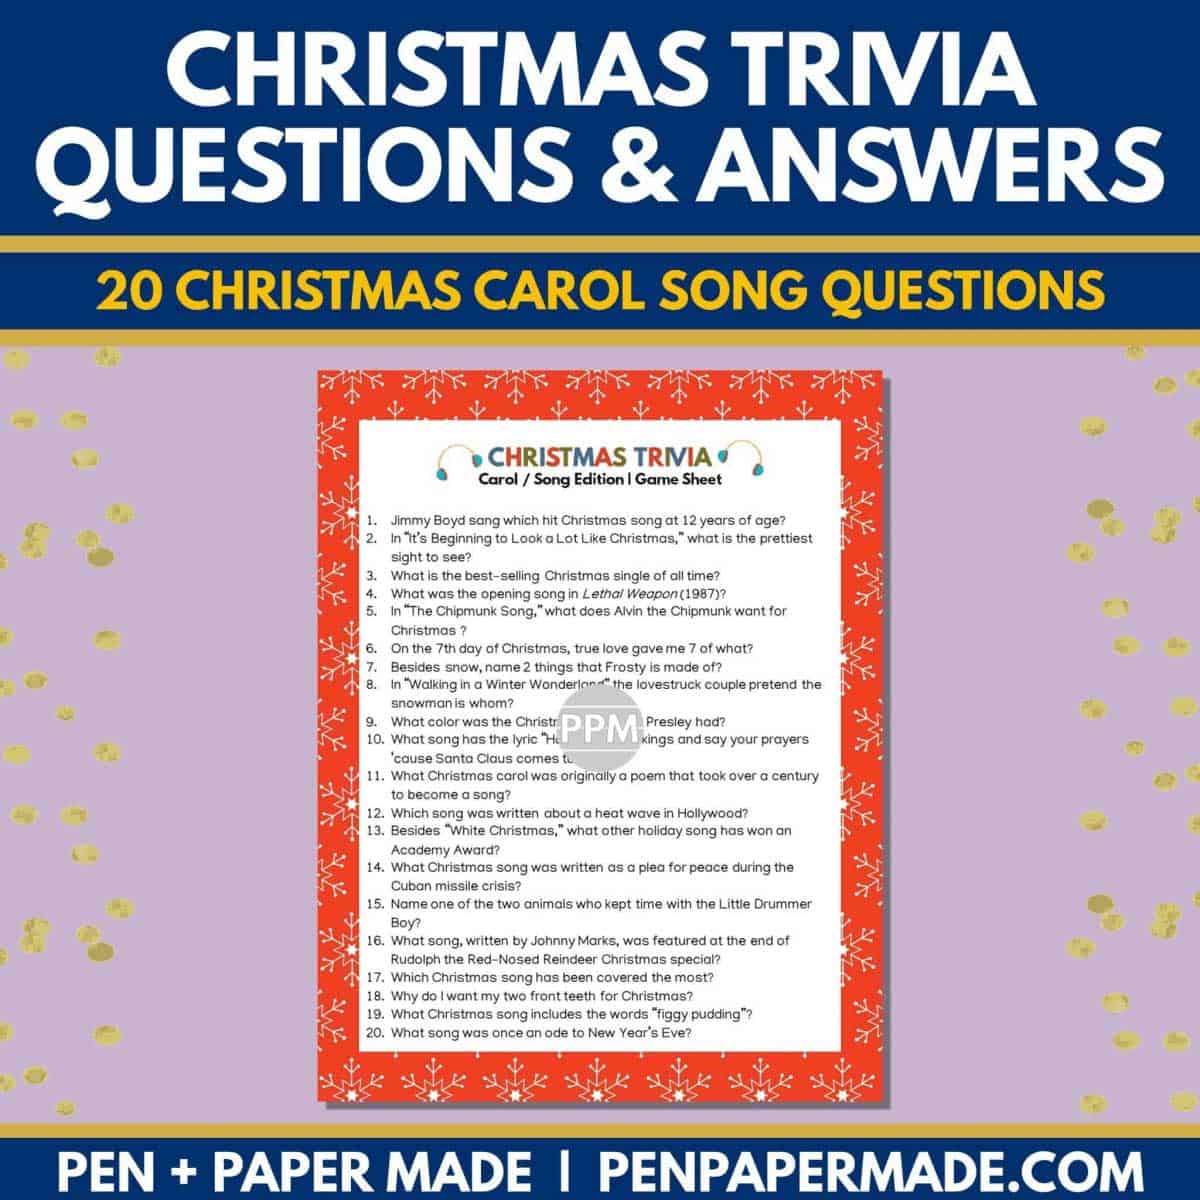 christmas songs and carols trivia questions and answer sheet.